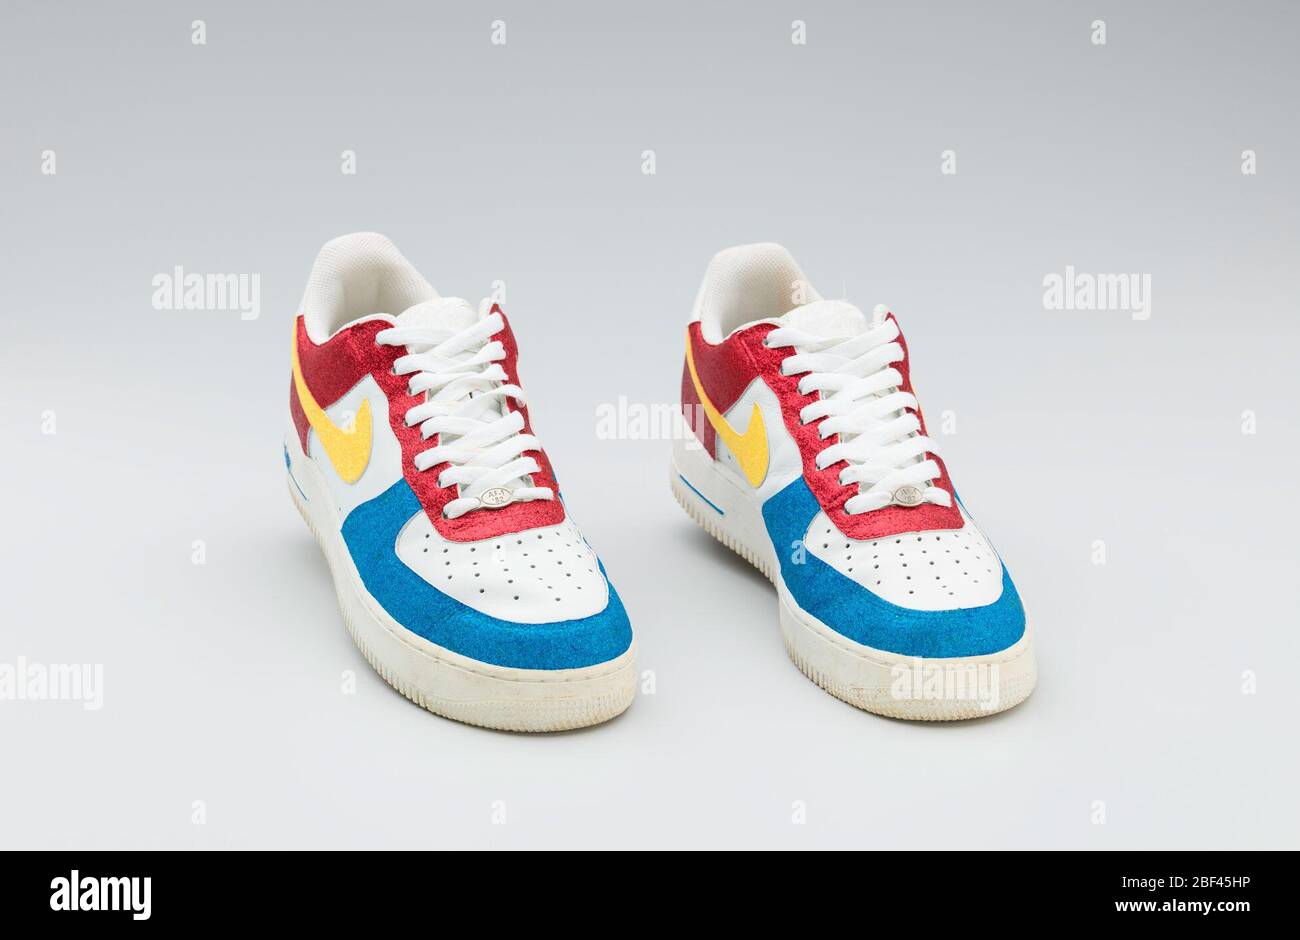 red blue yellow nike shoes